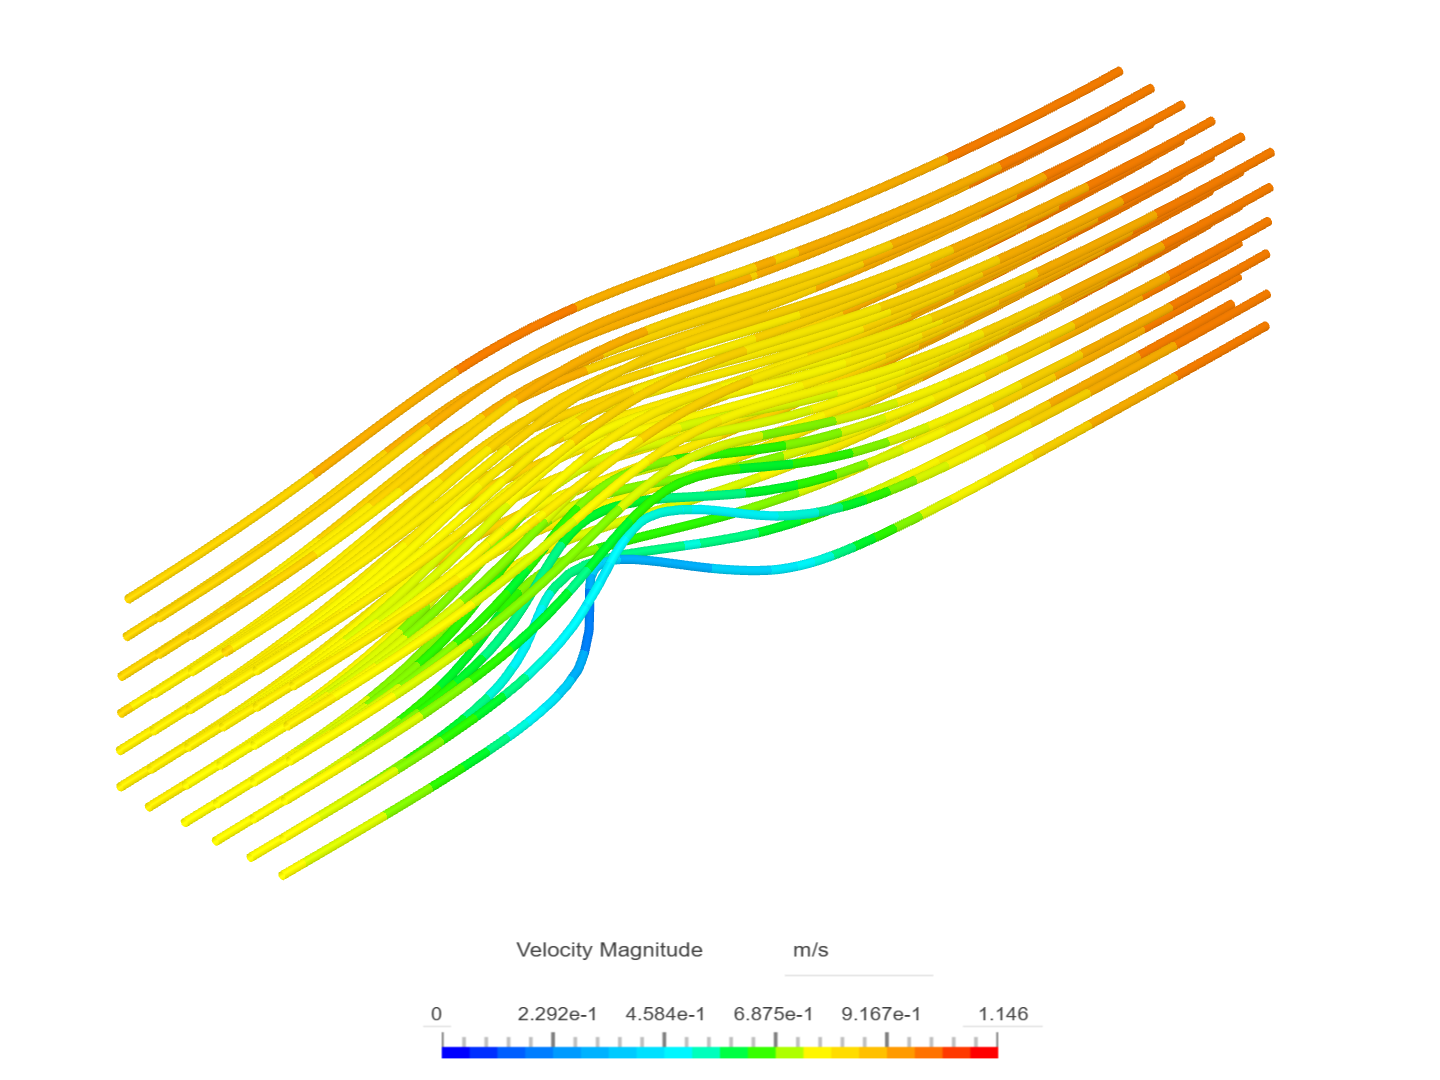 External Flow of CONE image